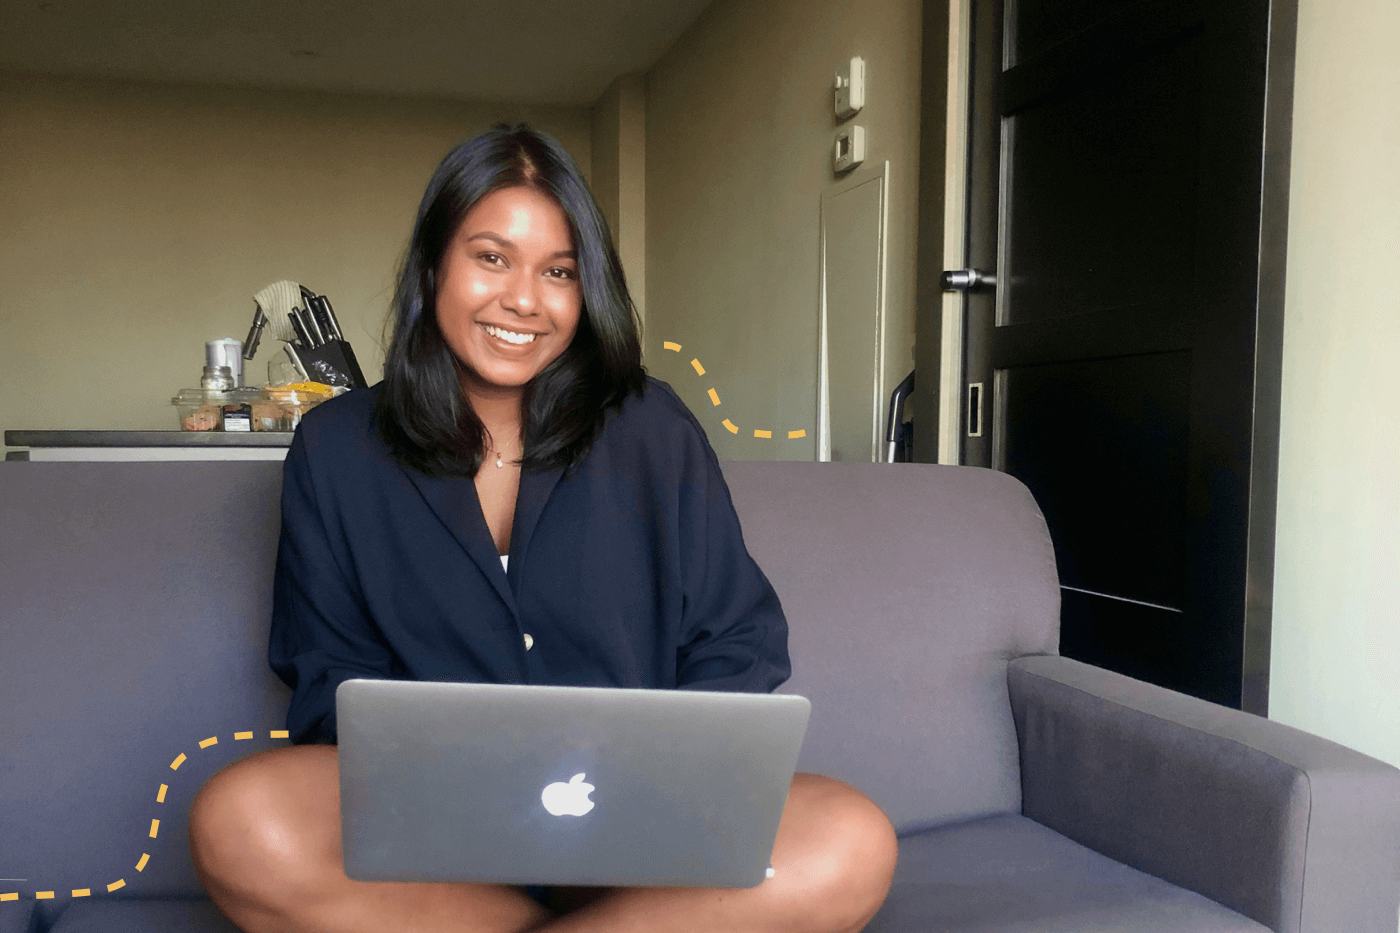 Our New Marketing Communications Specialist's First Month at Hive